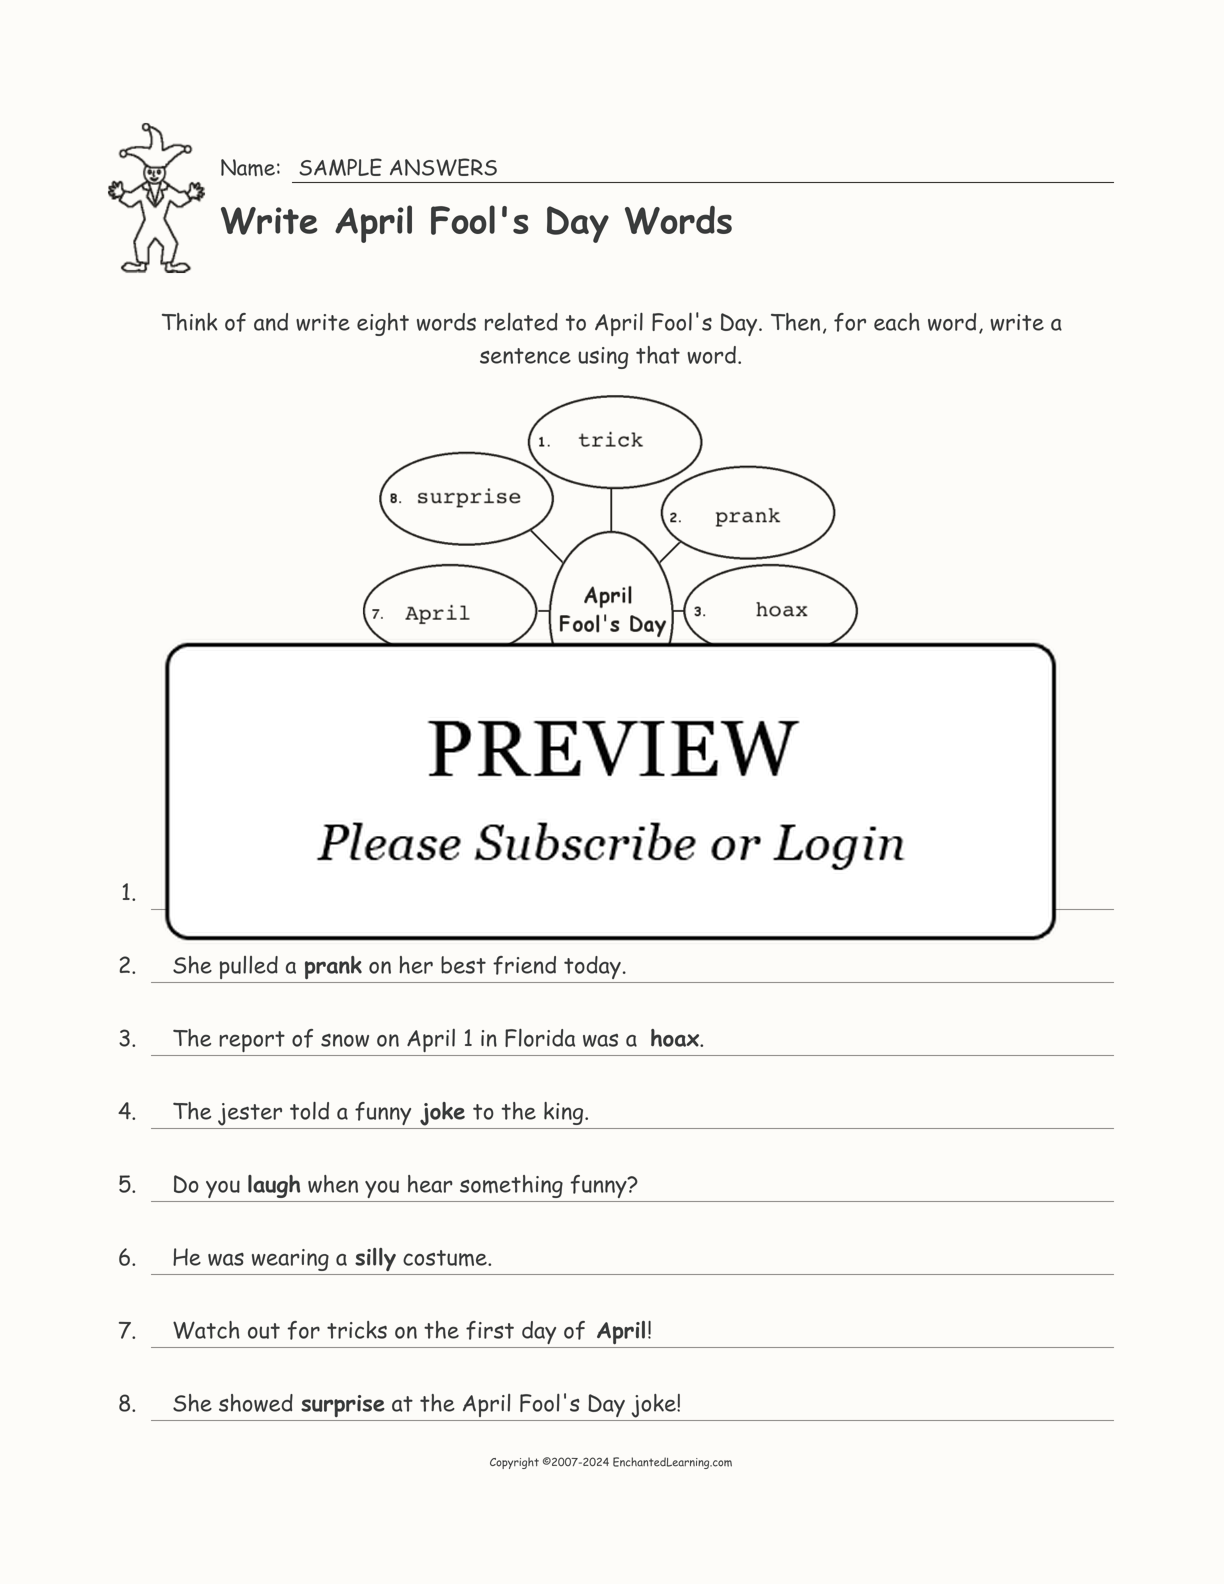 Write April Fool's Day Words interactive worksheet page 2